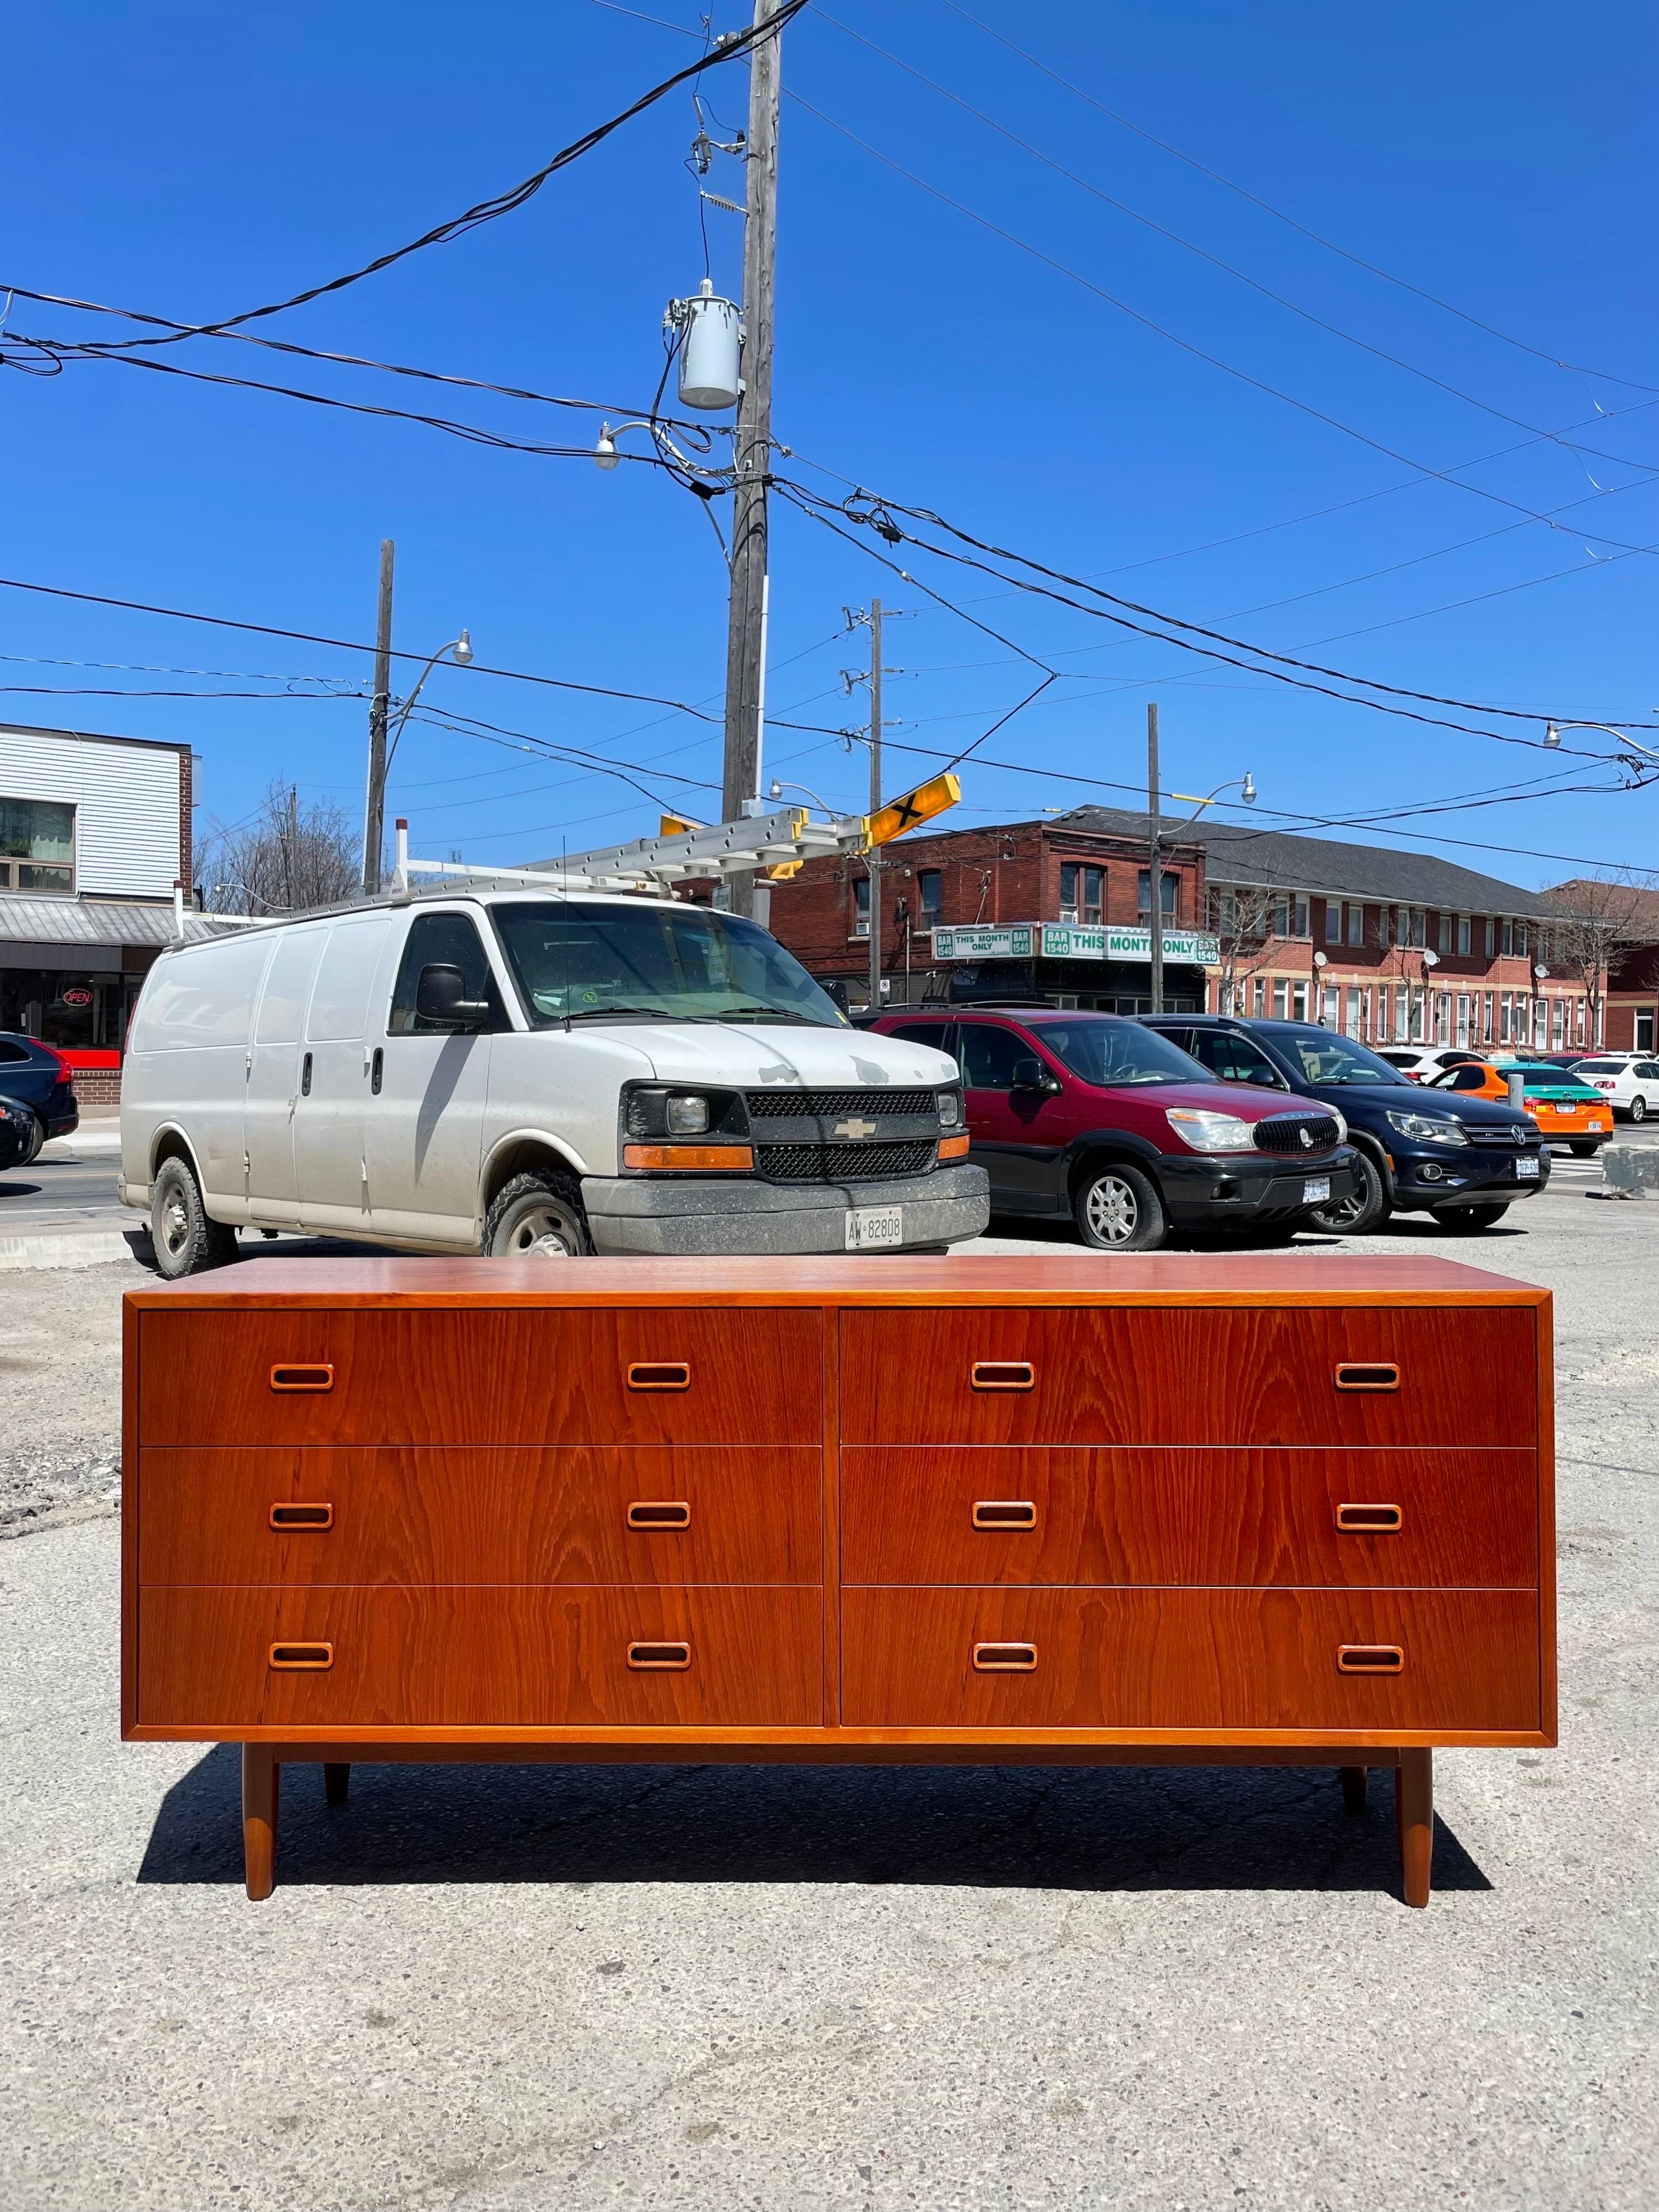 Fresh from the refinishers & this Arne Hovmand Olsen for Mogens Kold teak dresser shows it. In excellent condition; teak glows in the sunlight. Mirror included, with attached brackets for wall-mounting. Six large drawers glide well, providing ample